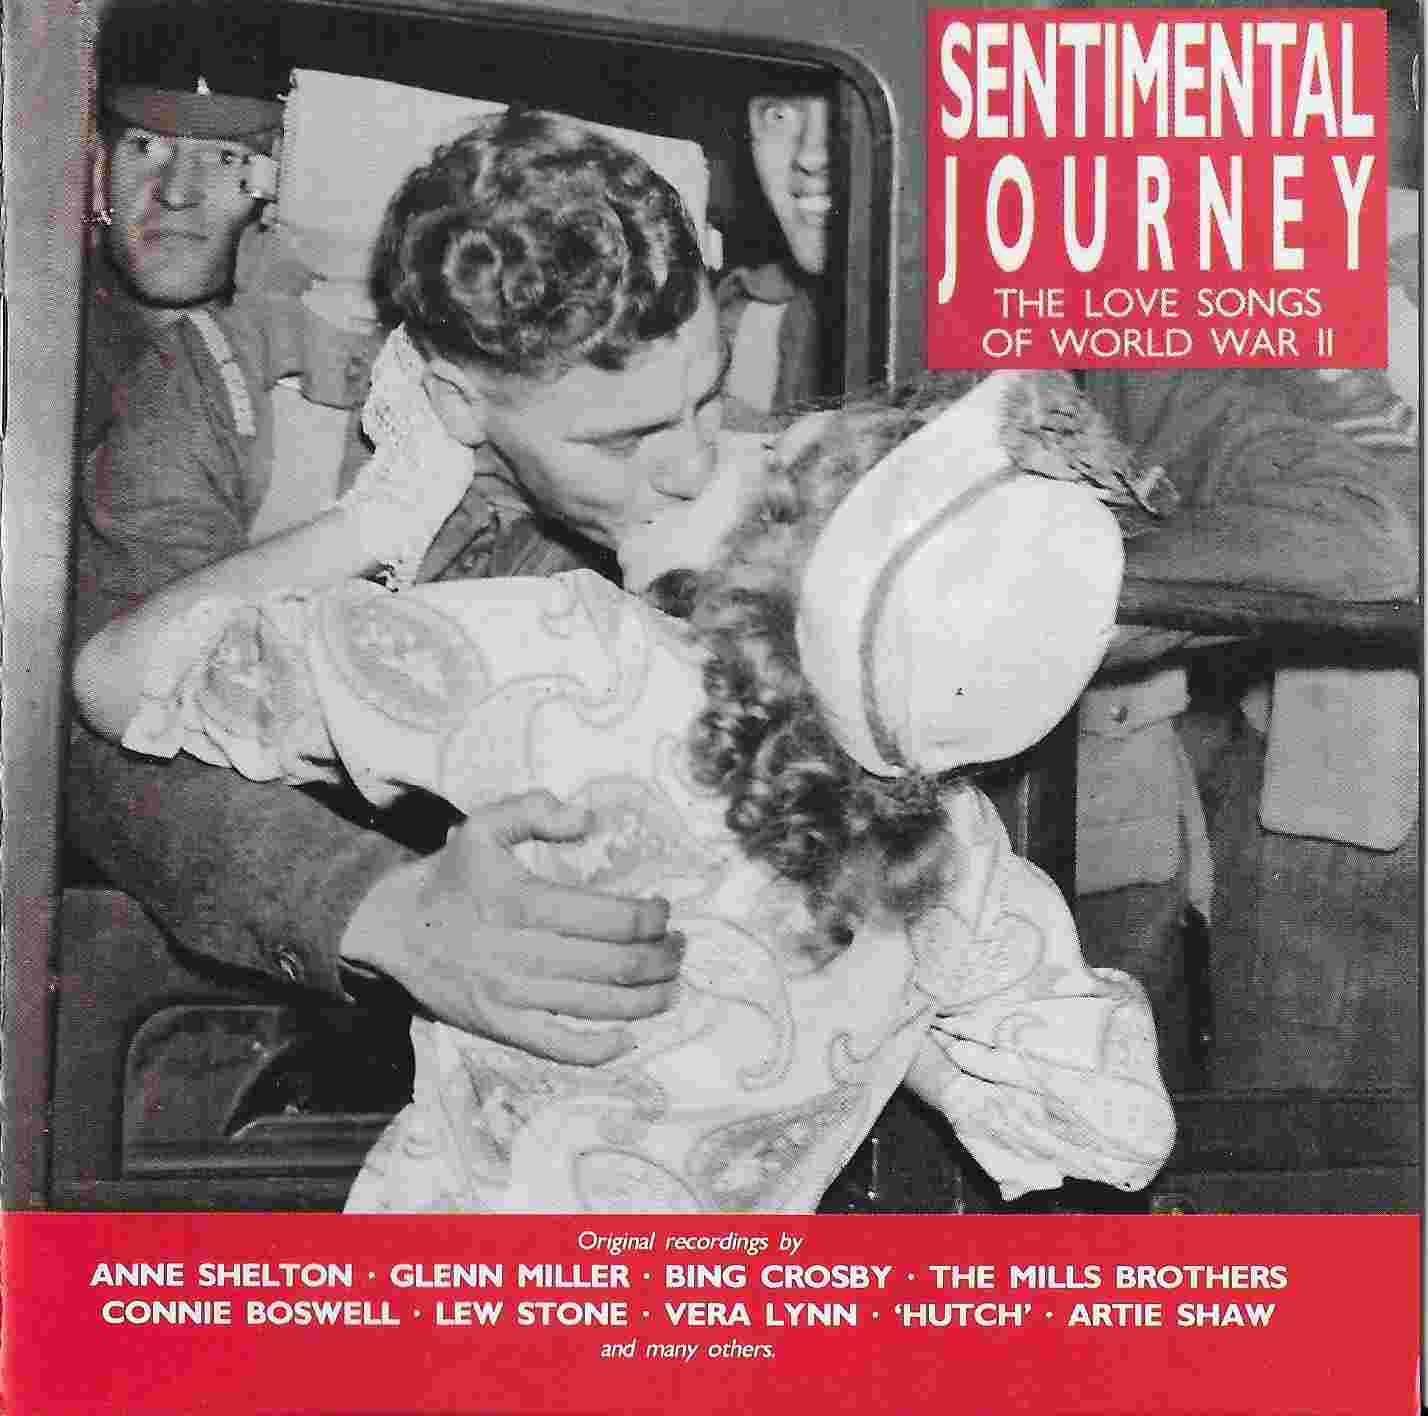 Picture of Sentimental journey by artist Various from the BBC cds - Records and Tapes library